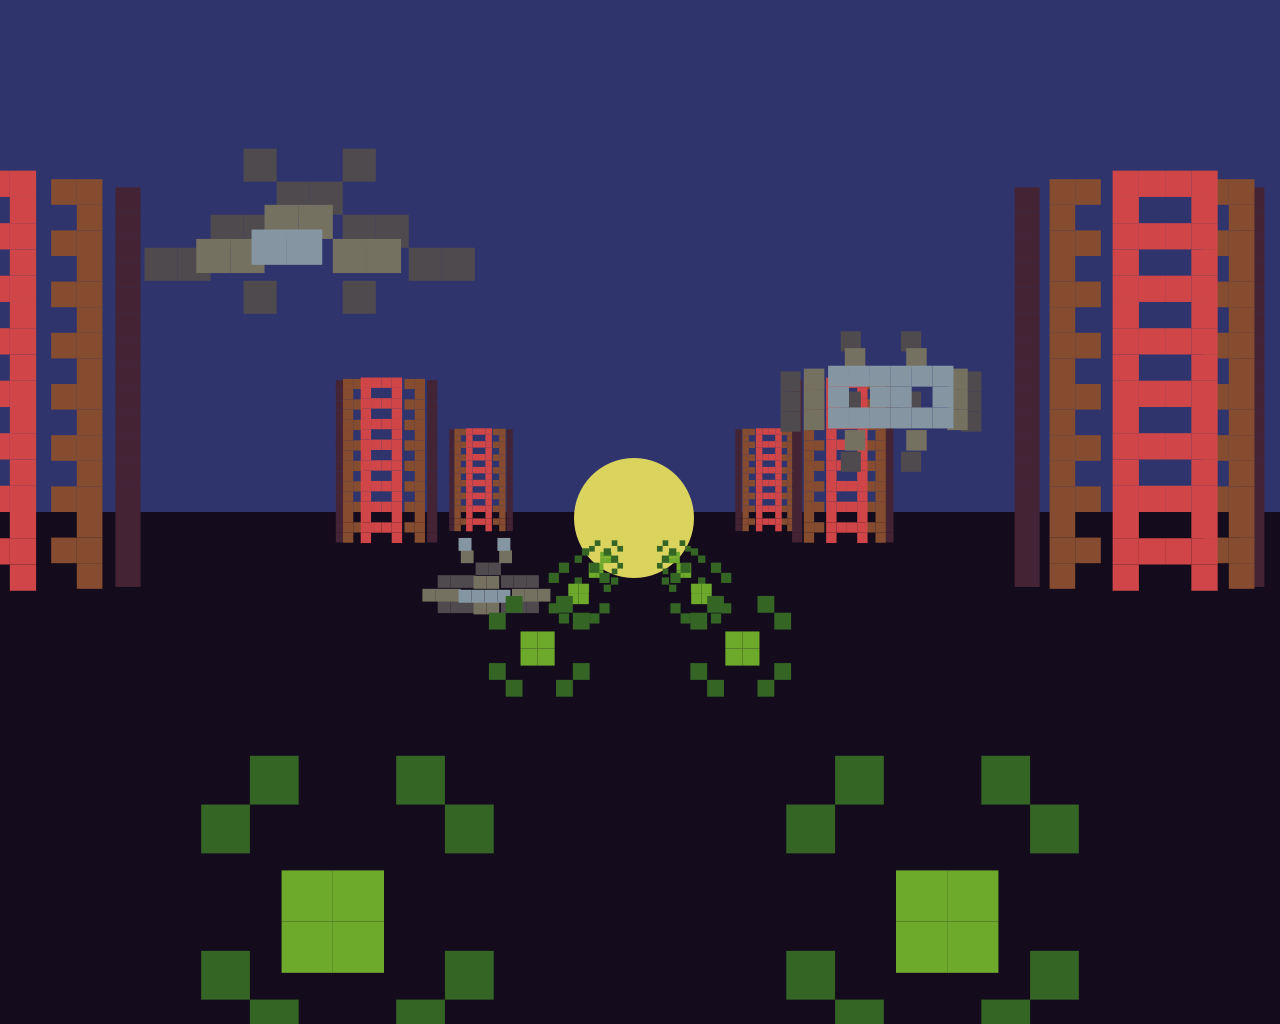 Videogame art of glowing green blobs being fired in first person at futuristic vehicles coming down a city street, in low-res.